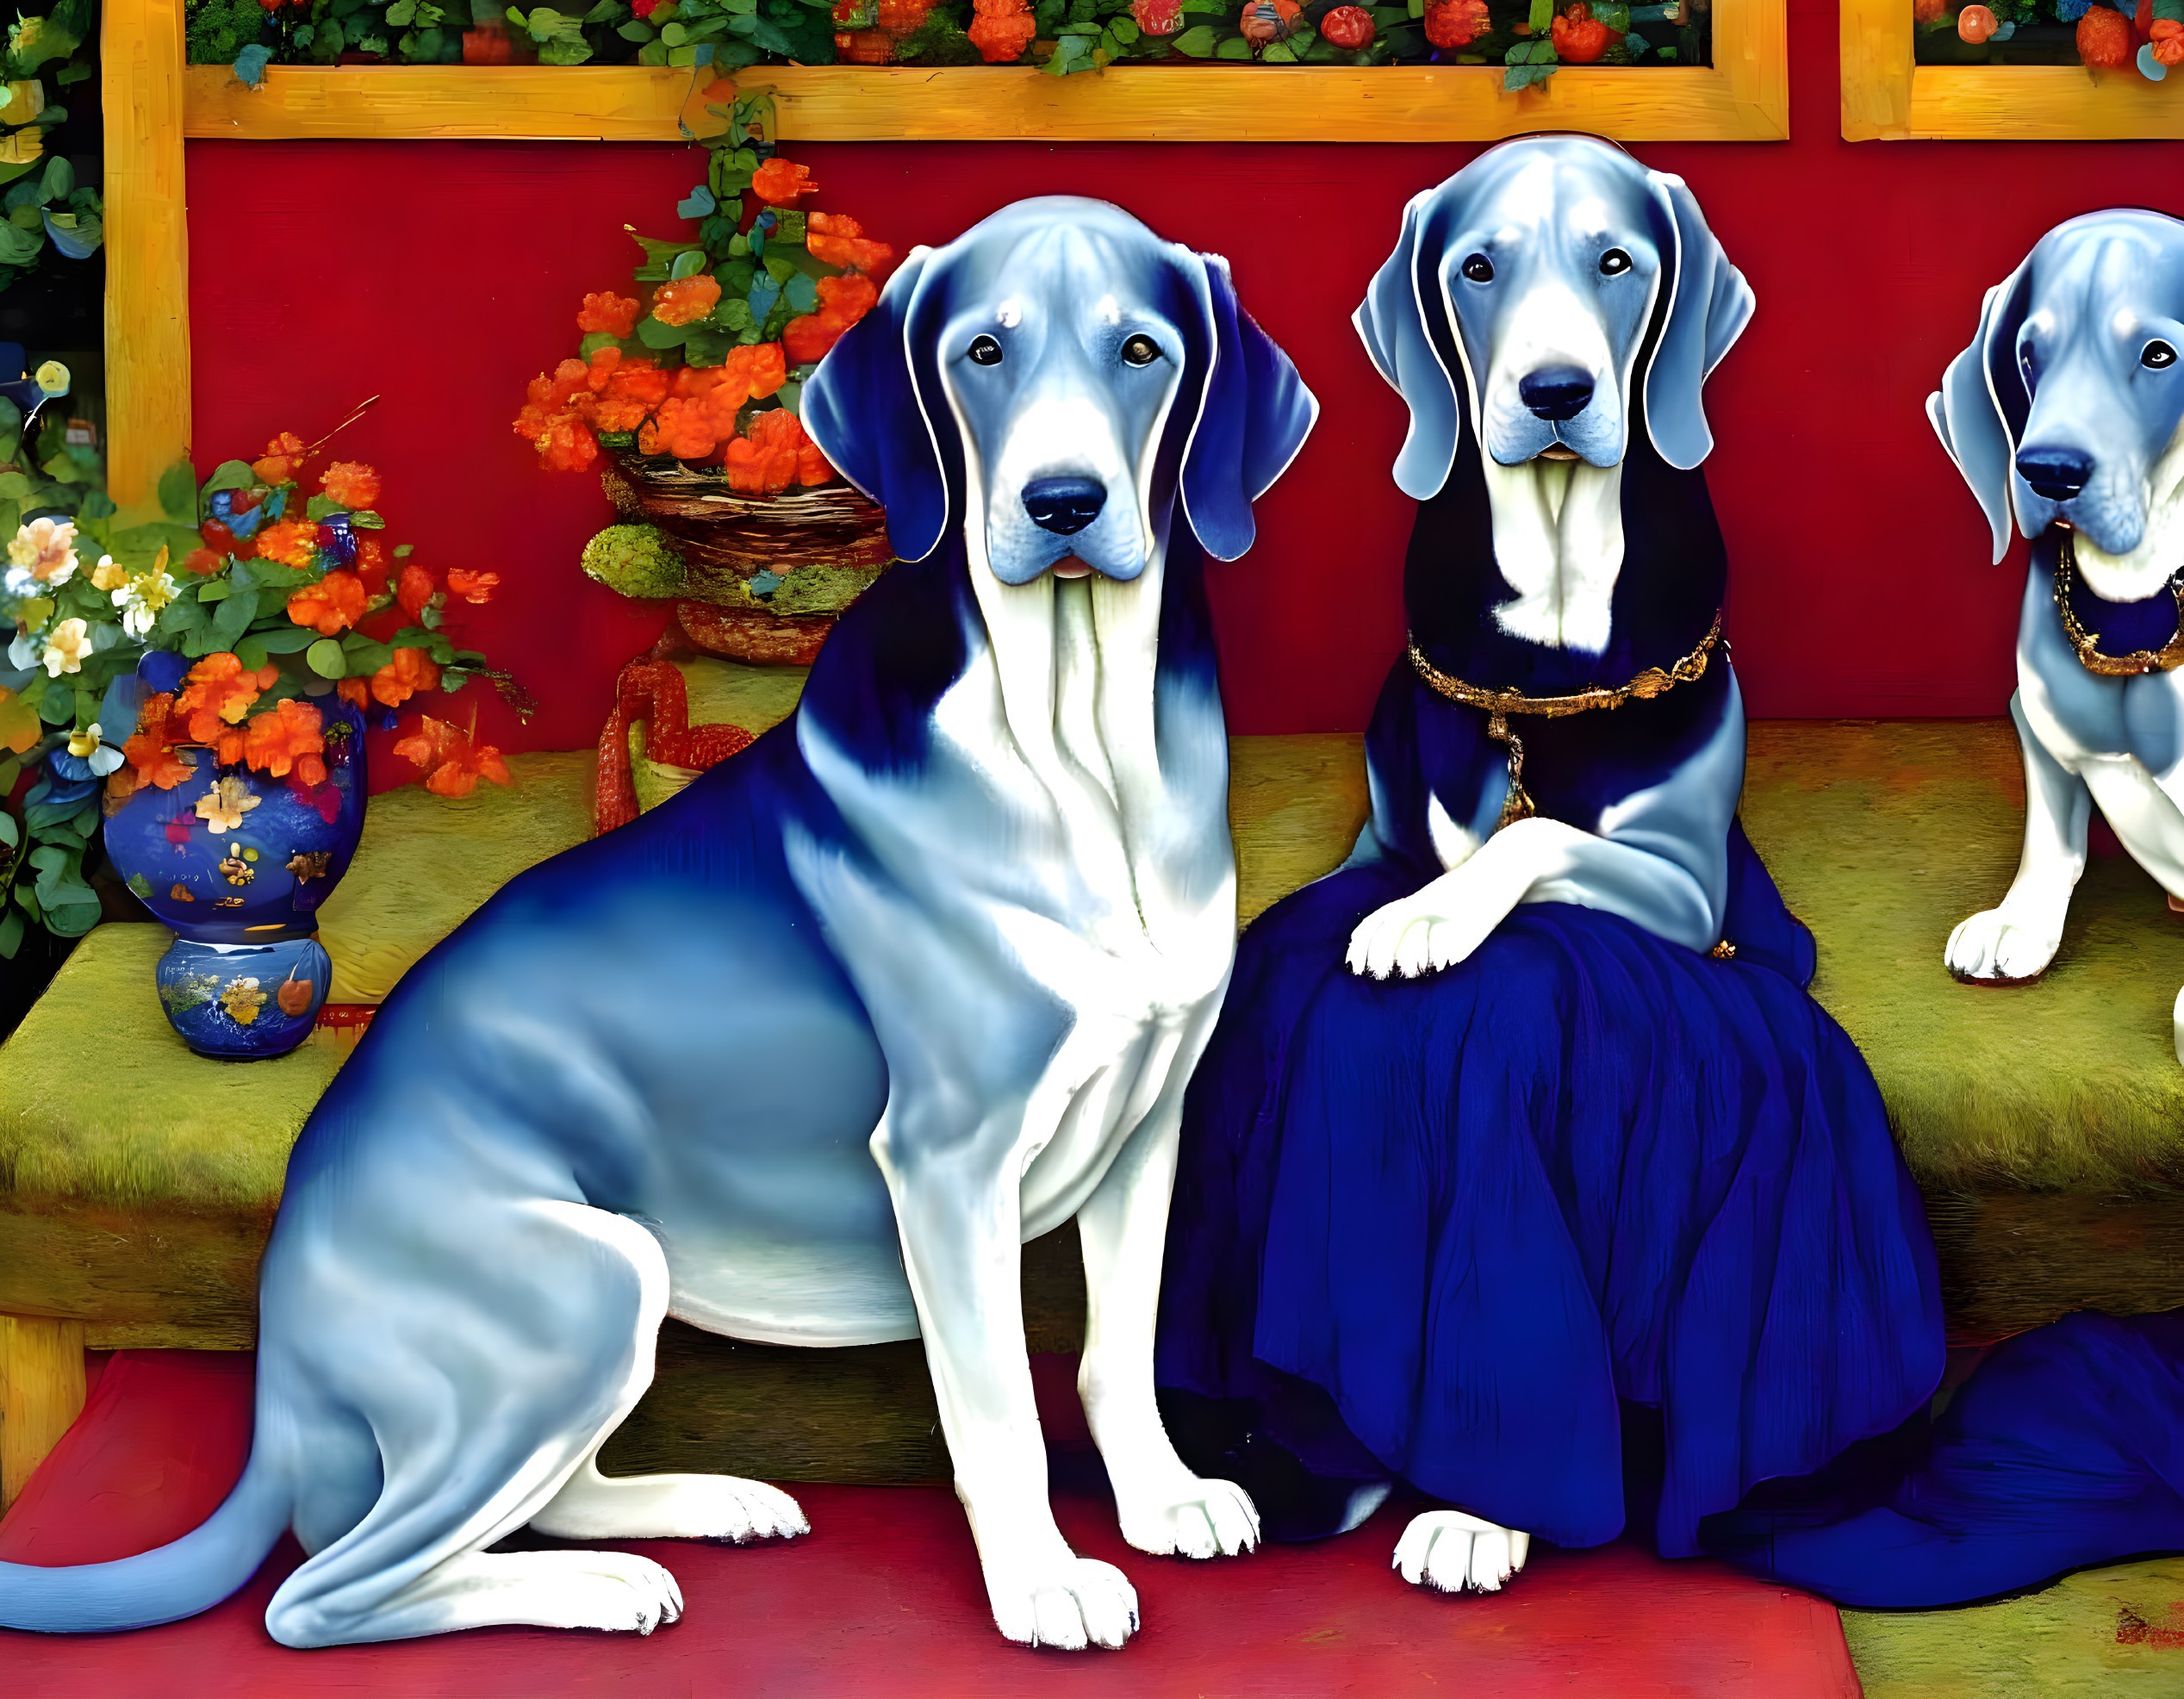 Anthropomorphic dogs in luxurious attire on red bench with flower pot